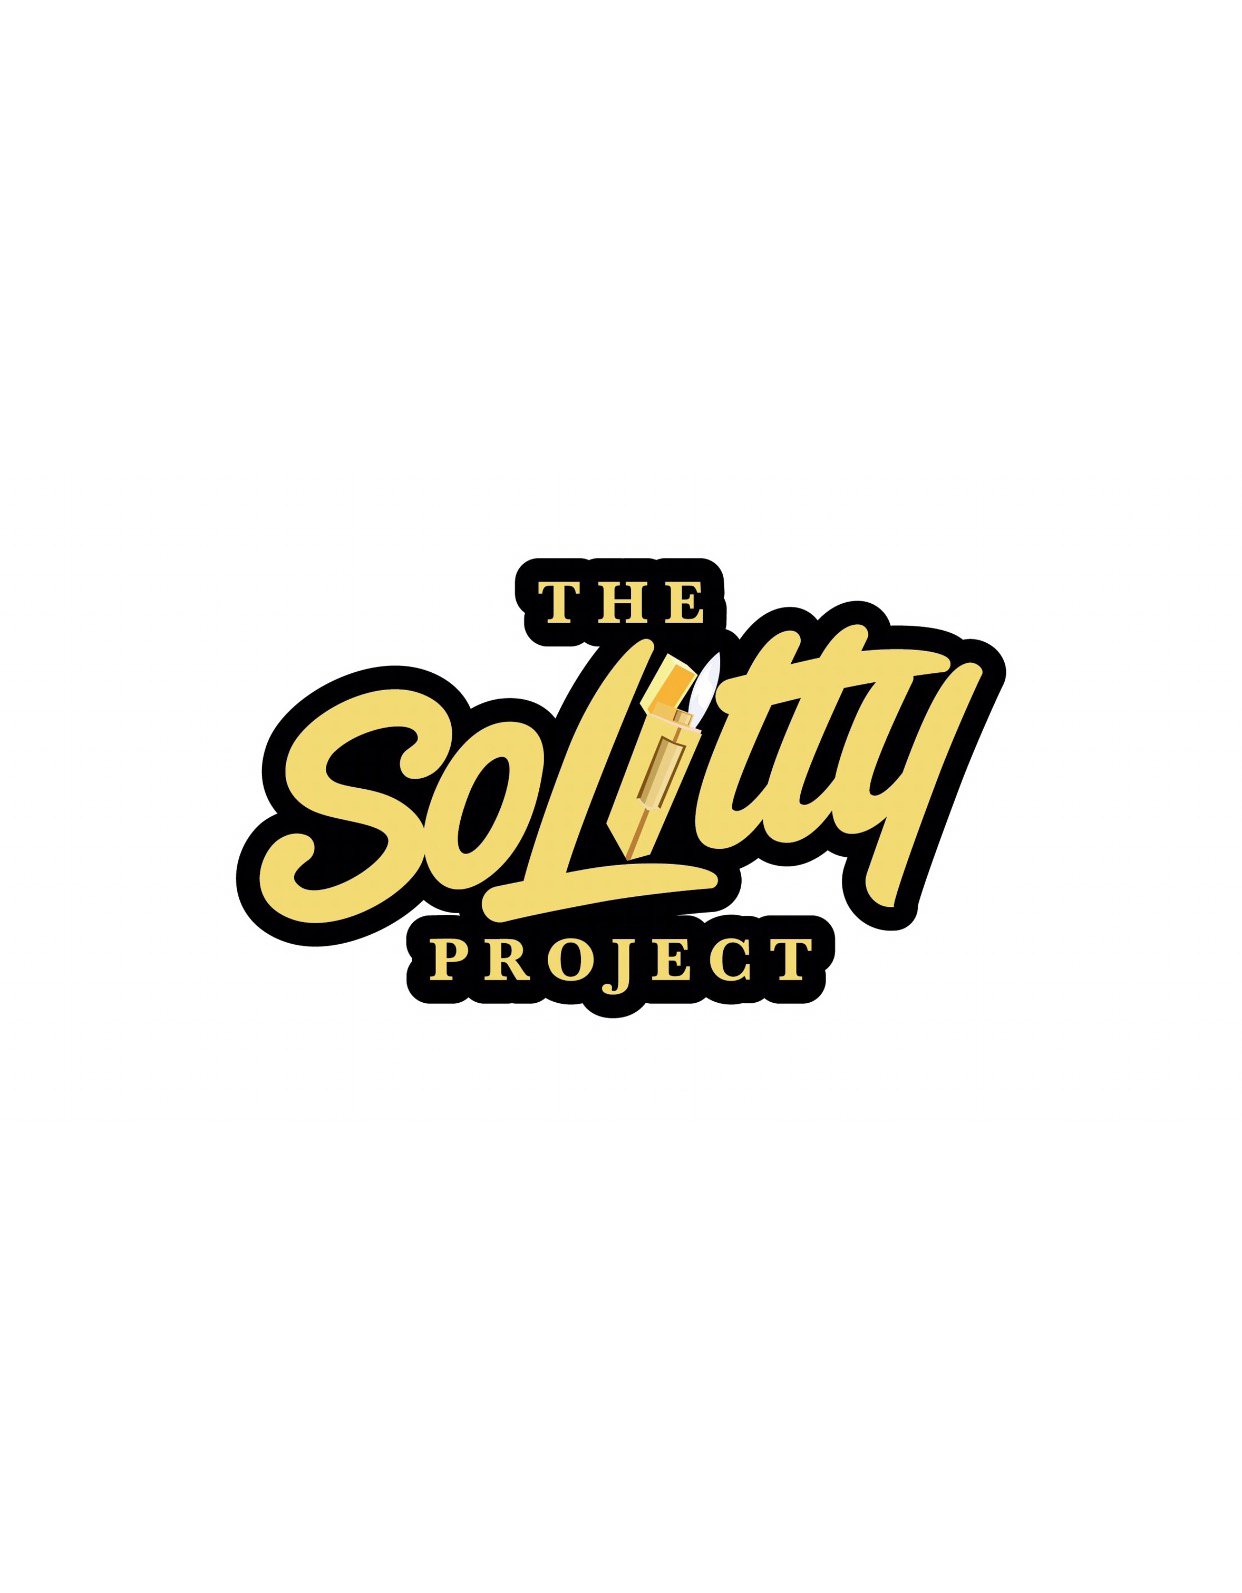  THE SOLITTY PROJECT